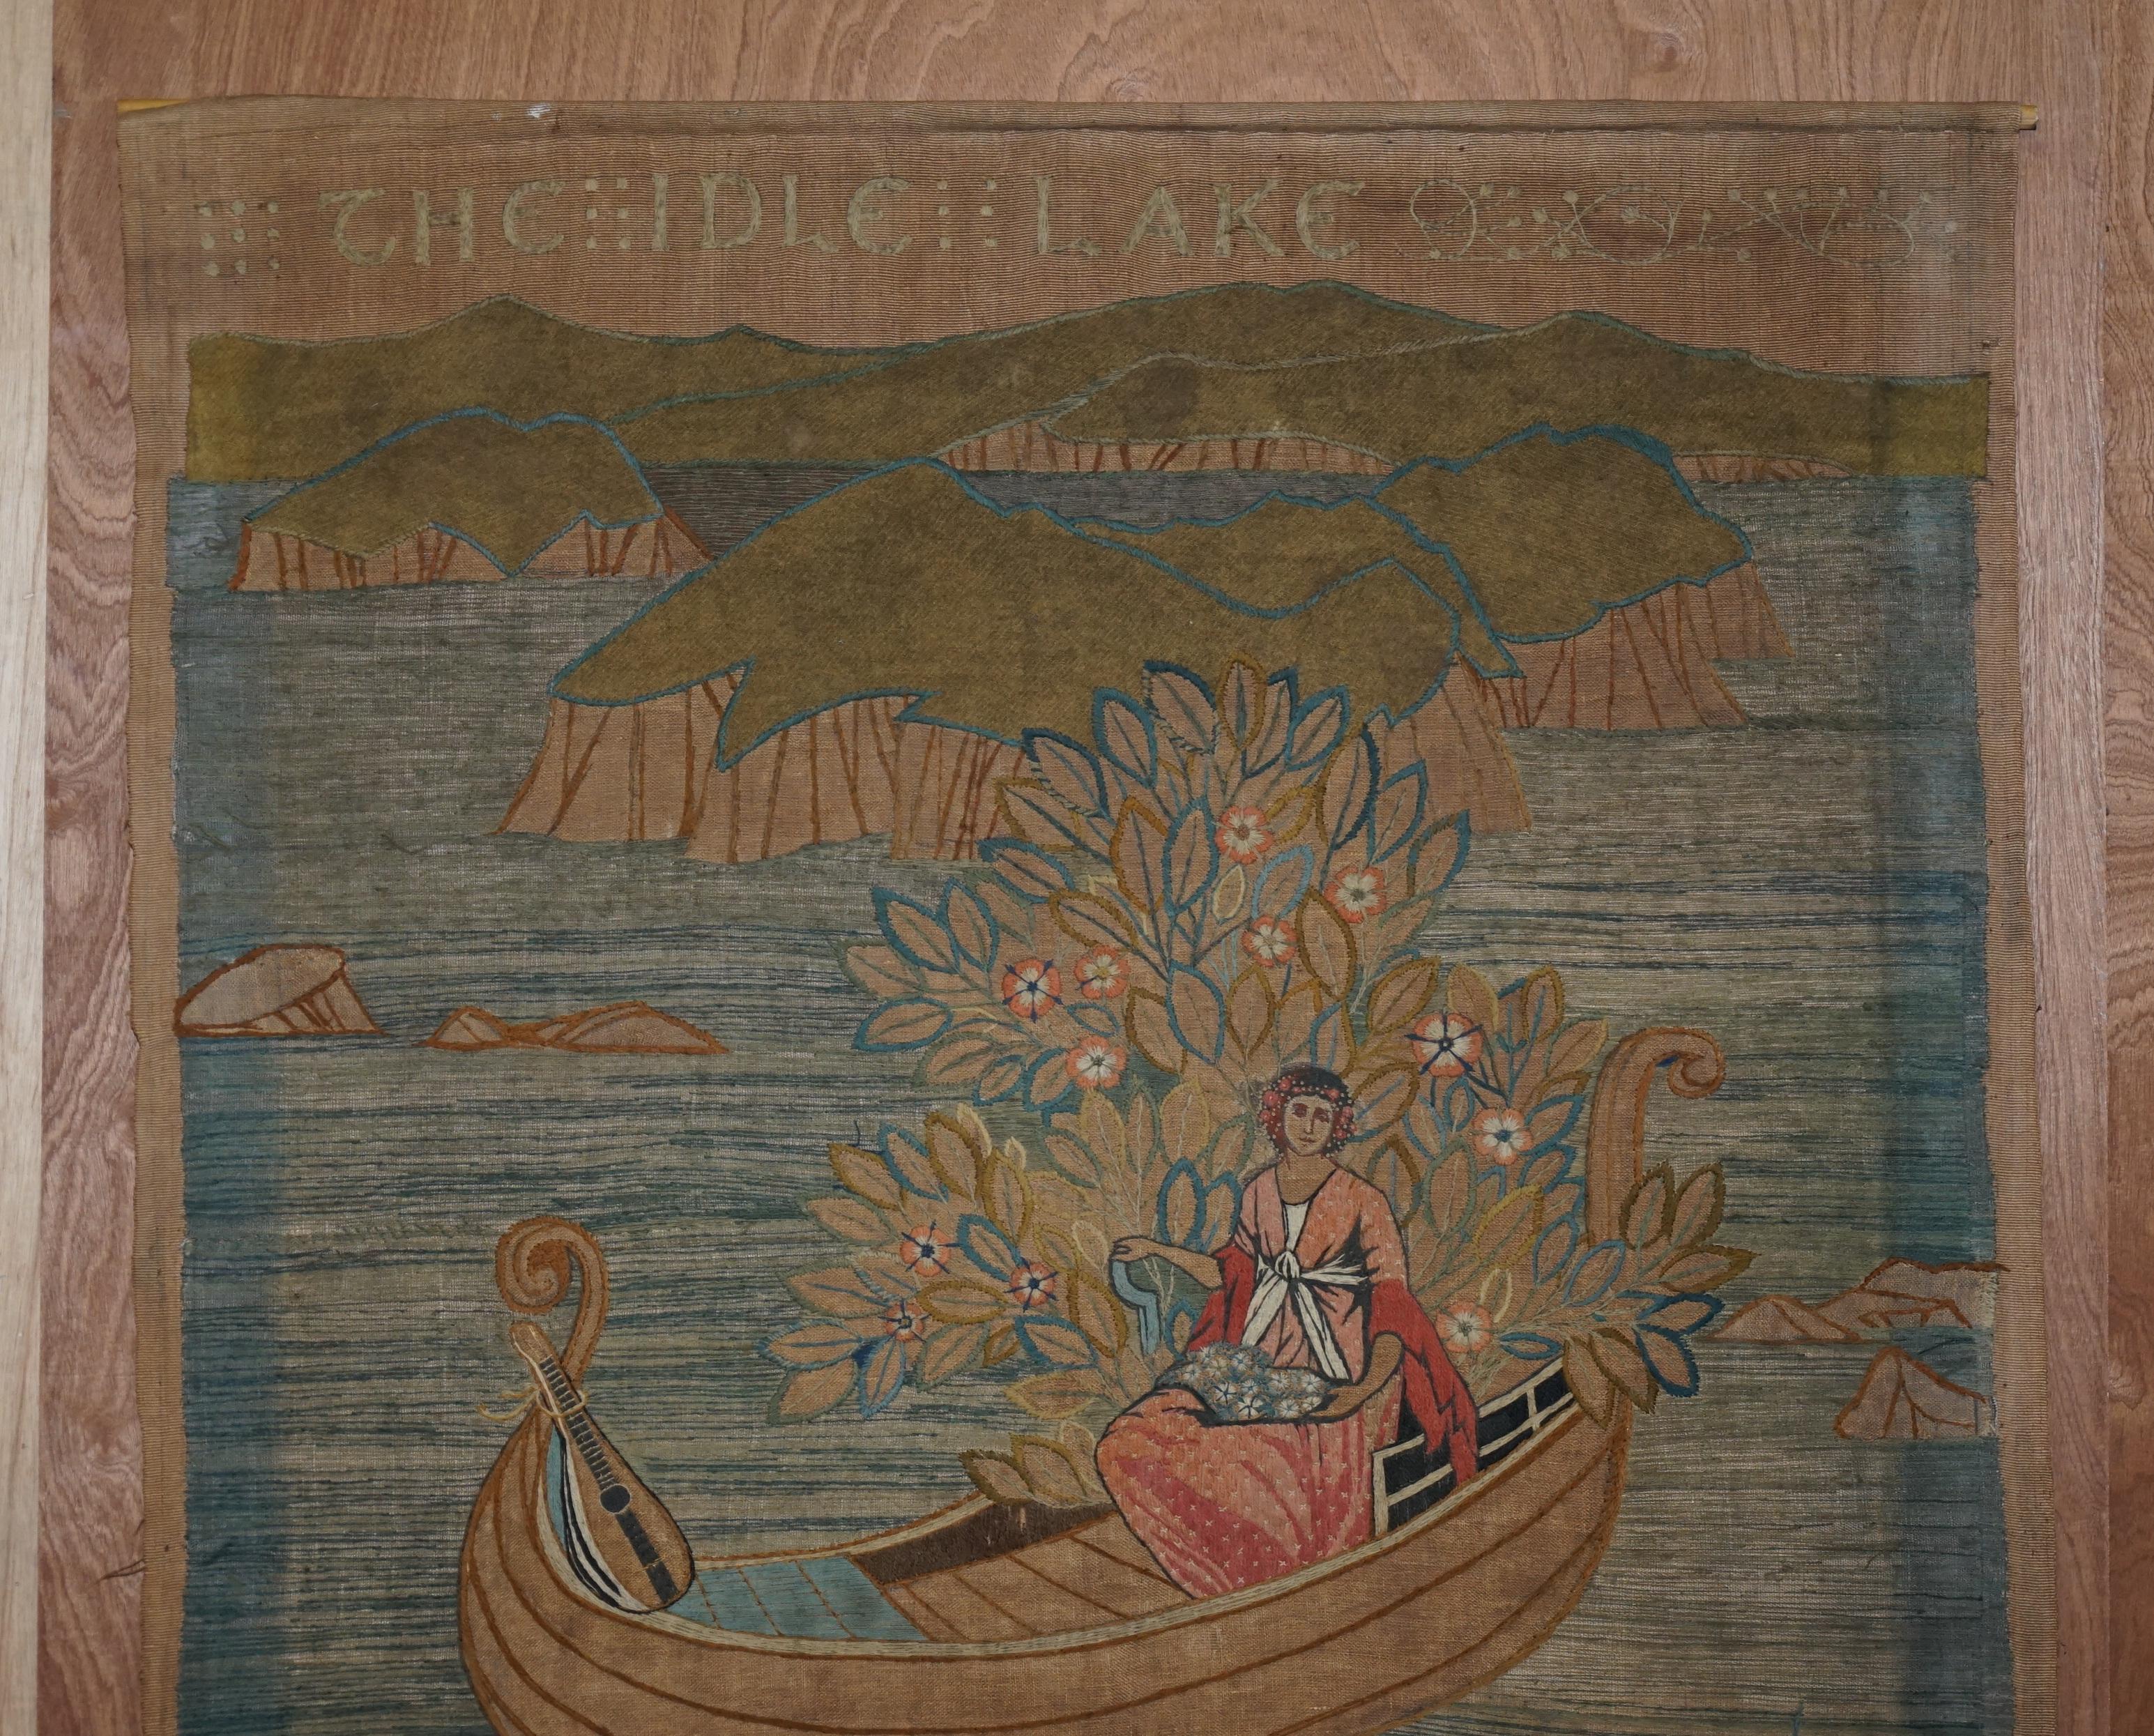 We are delighted to offer for sale this stunning Arts & Crafts circa 1850 Embroidered Tapestry of the Idle Lake depicting Phaedria the Faerir Queen in a boat with a lute

The Faerie Queene is an English epic poem by Edmund Spenser. Books I–III